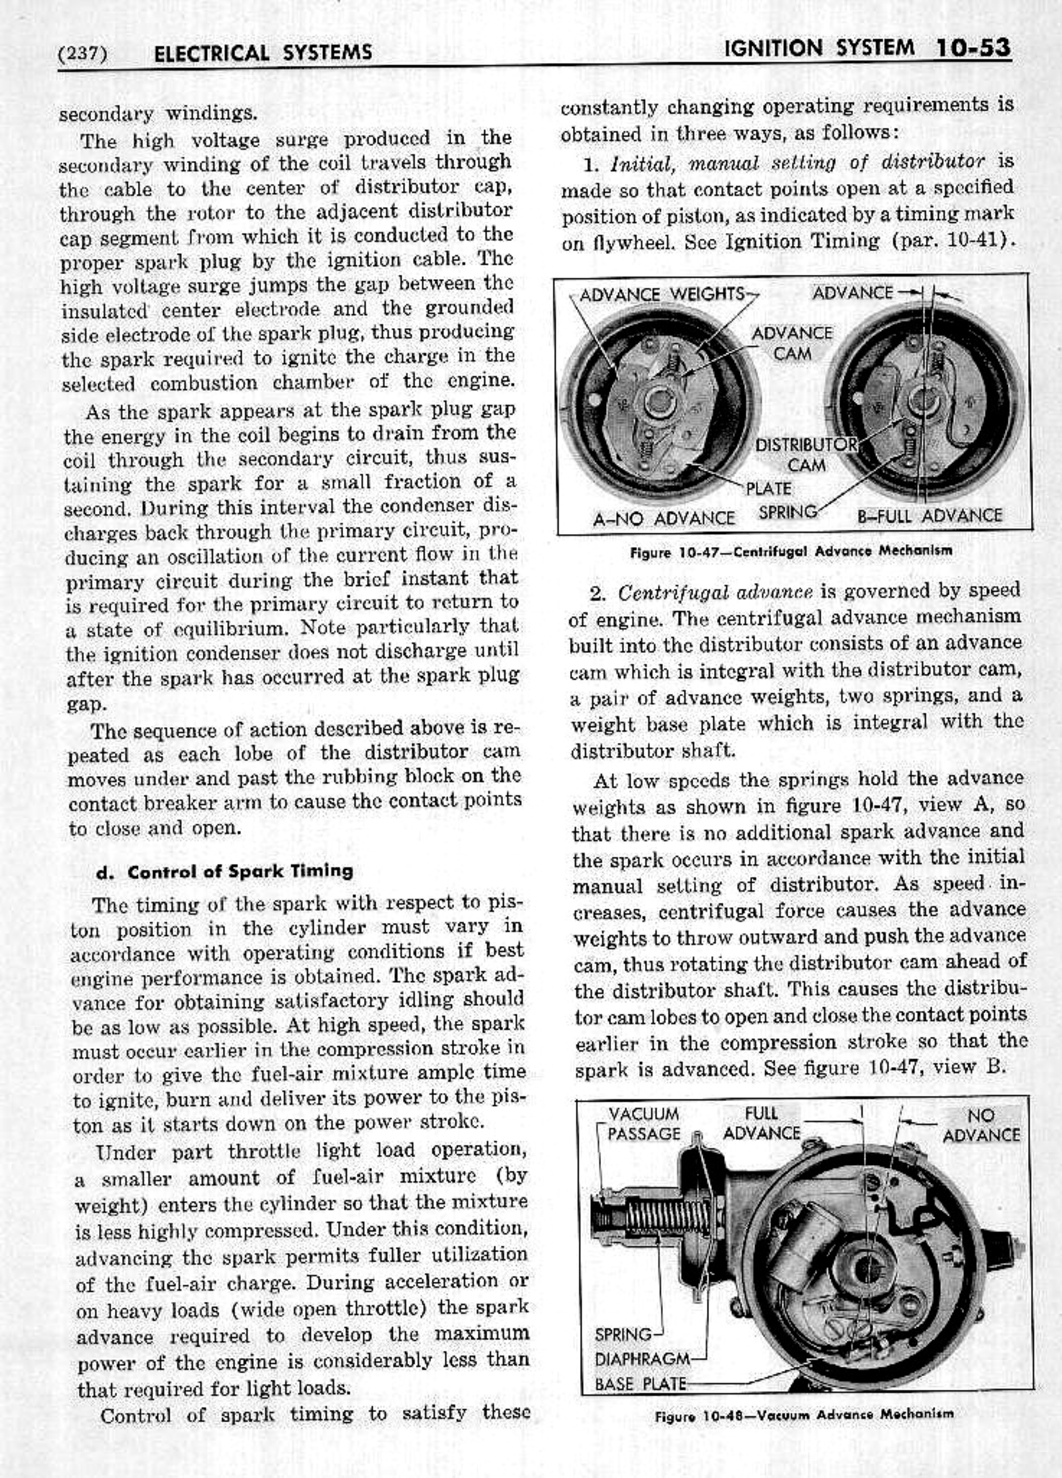 n_11 1953 Buick Shop Manual - Electrical Systems-053-053.jpg